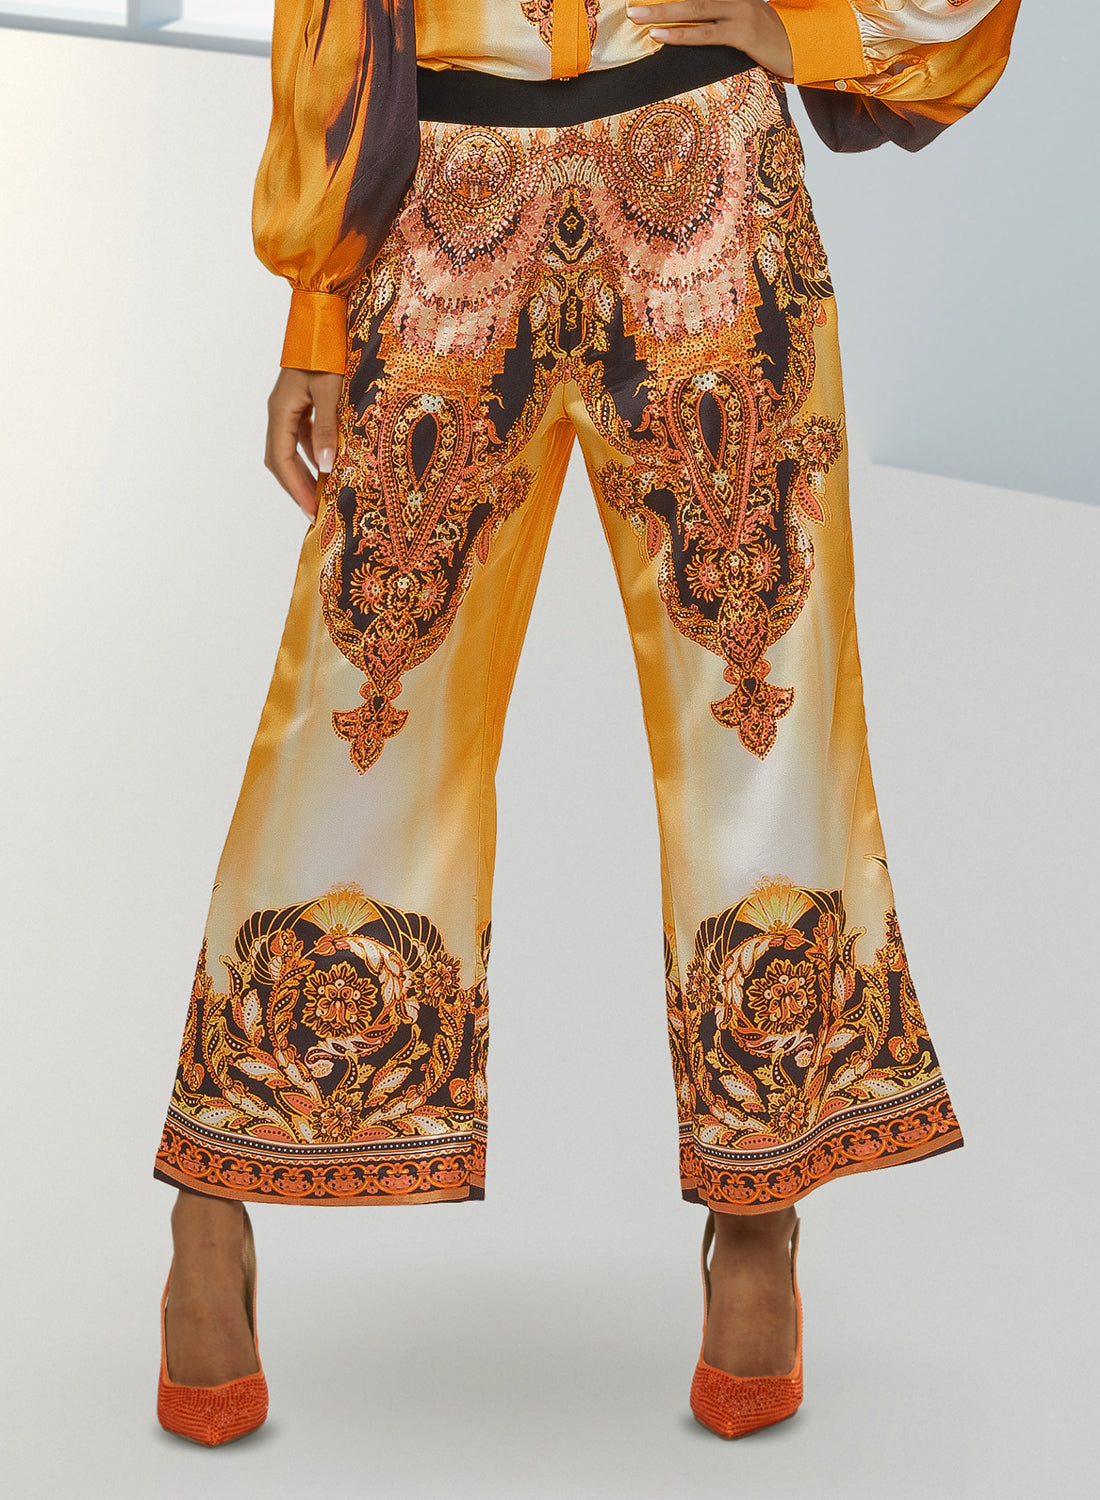 Love The Queen 17437P - Satin Print Pants with Rhinestone Details